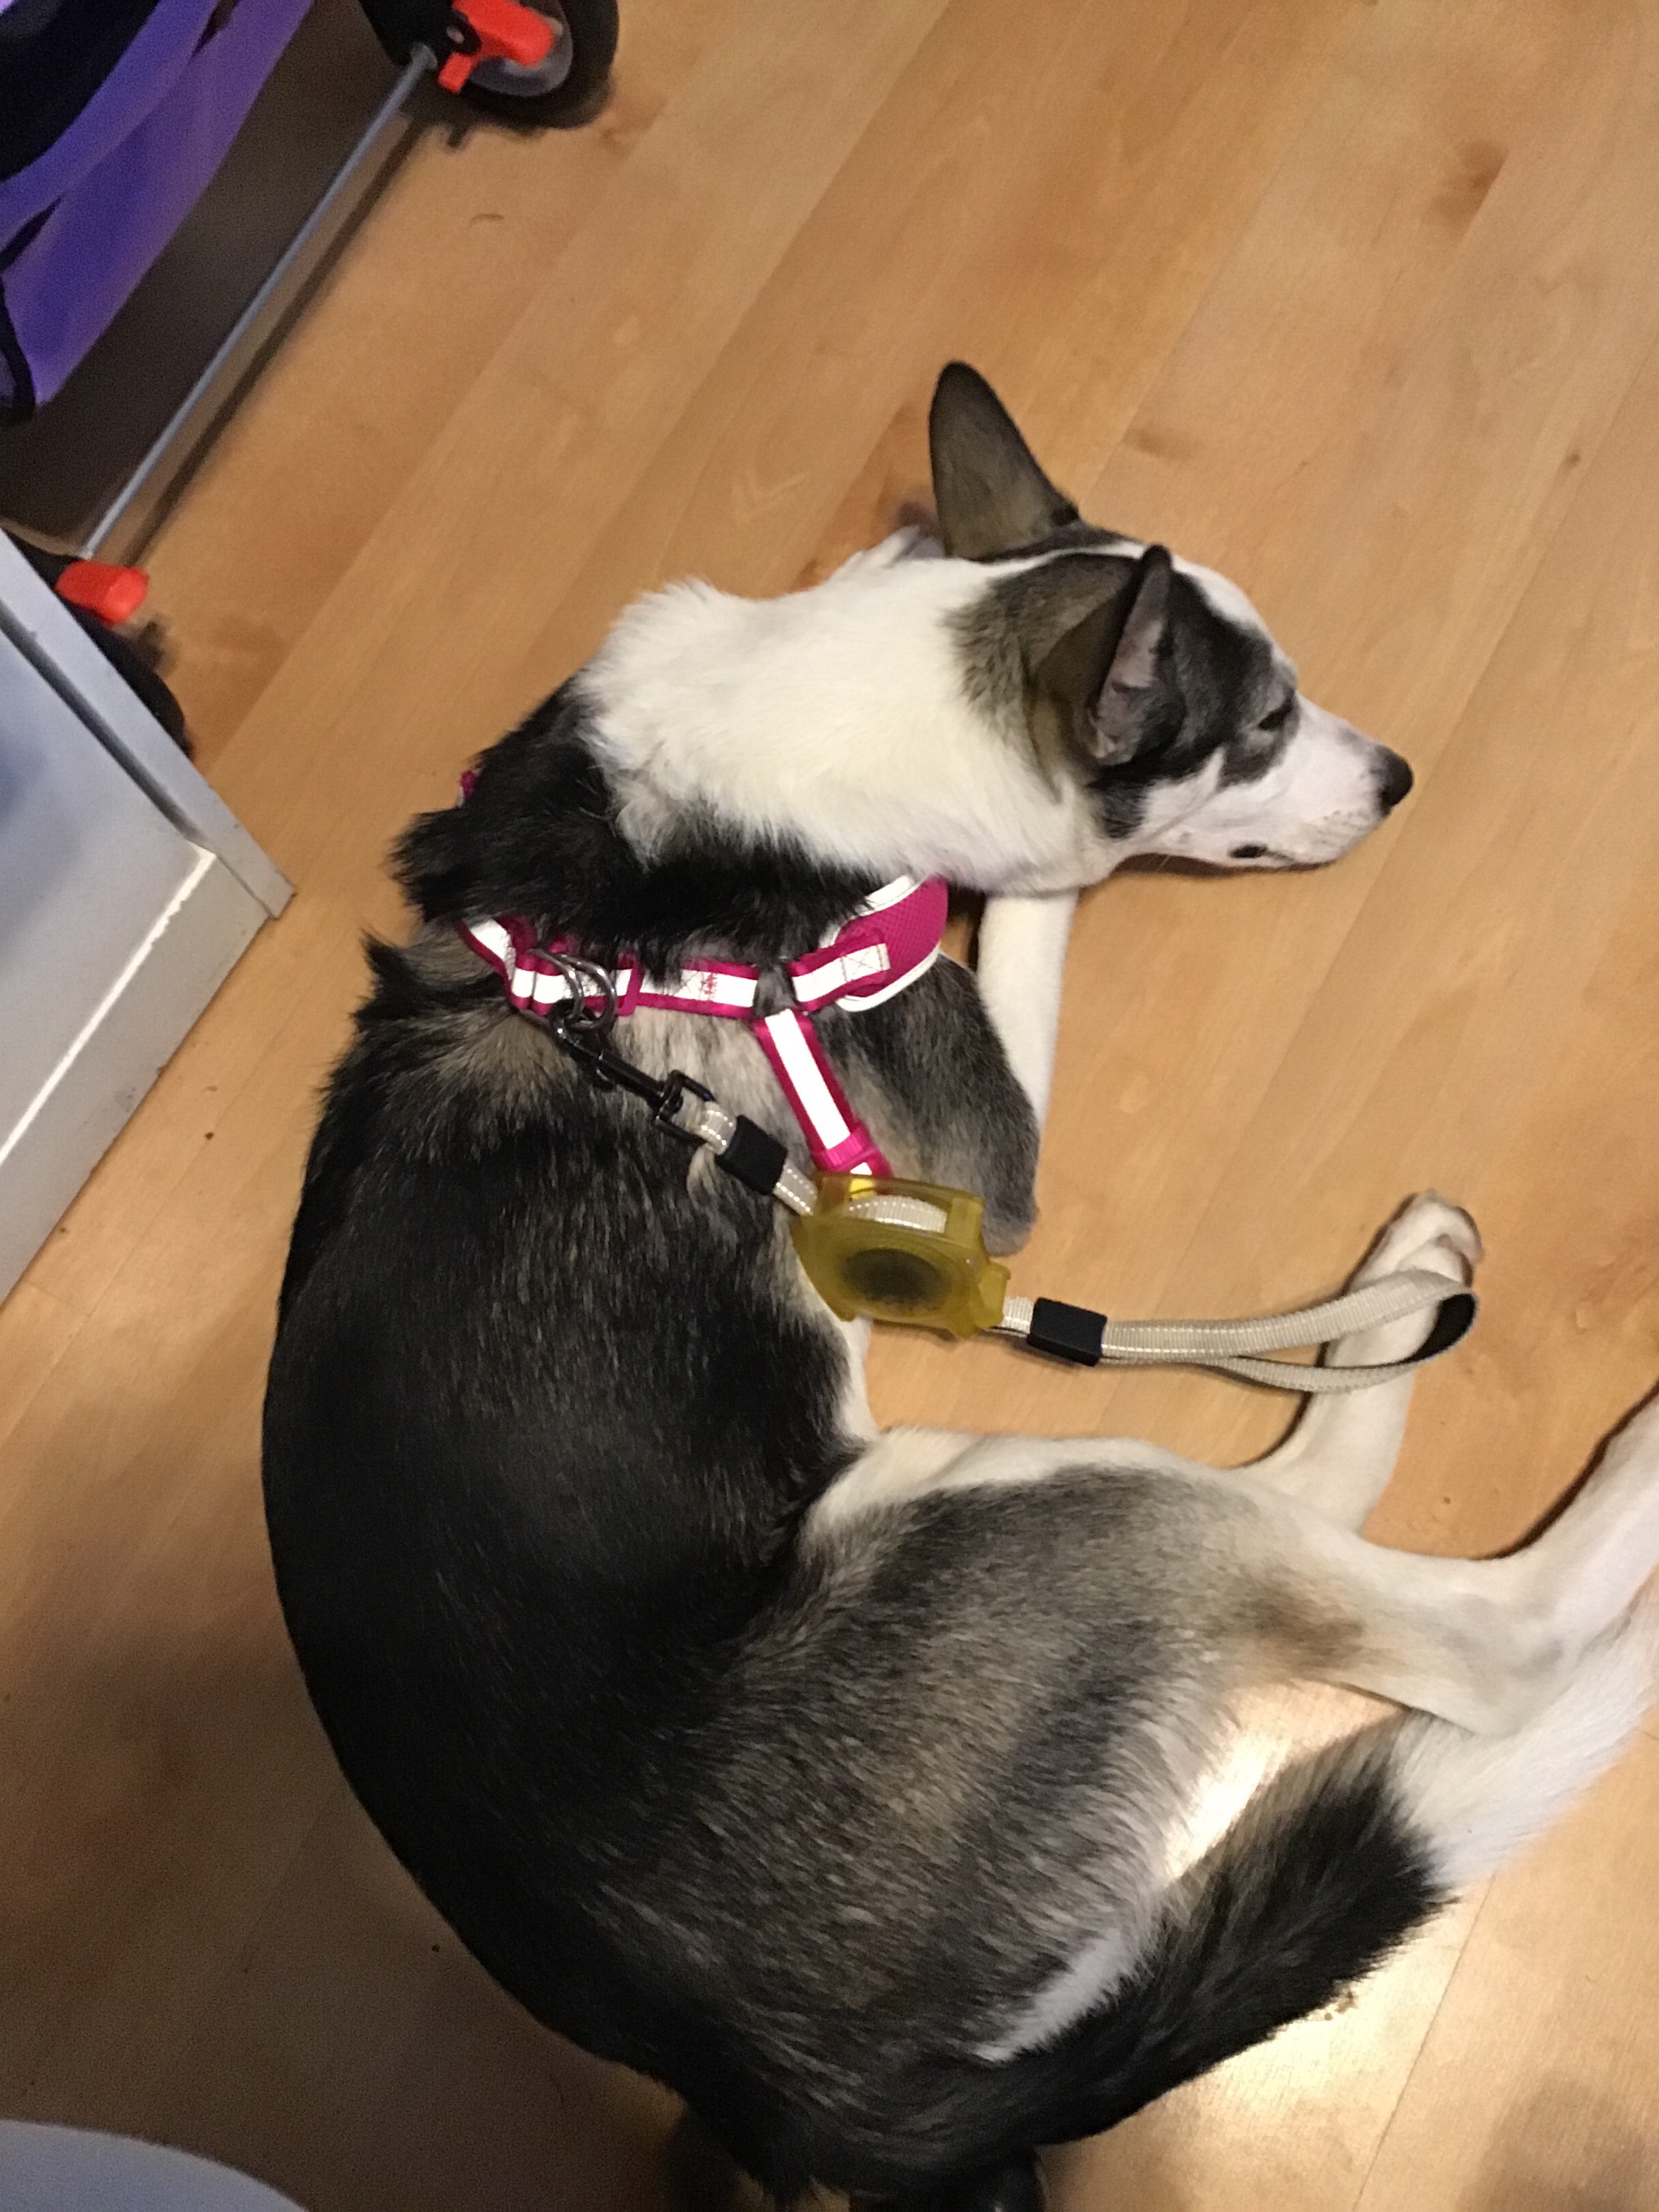 Image description: A black and white husky sleeping on her side and wearing a pink harness and gray leash.